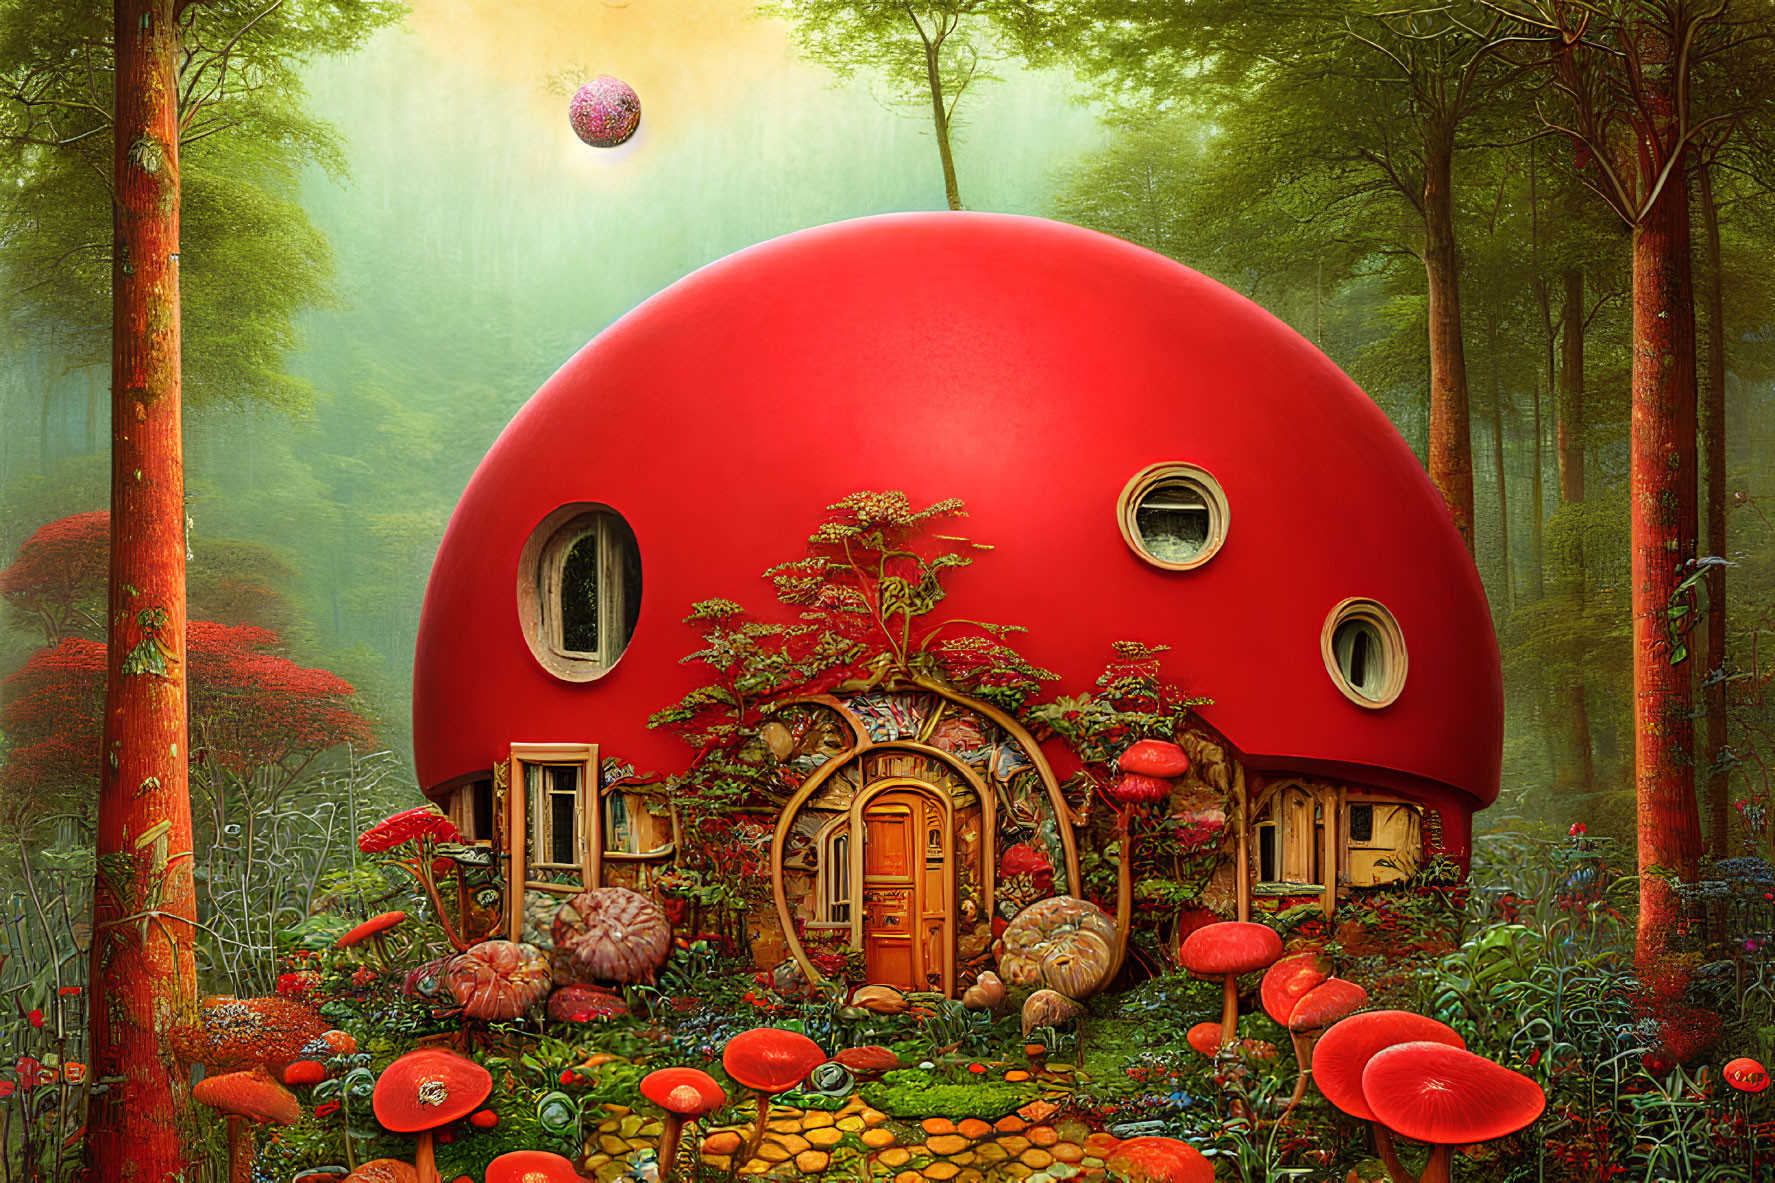 Red Mushroom House Surrounded by Lush Forest and Colorful Plants